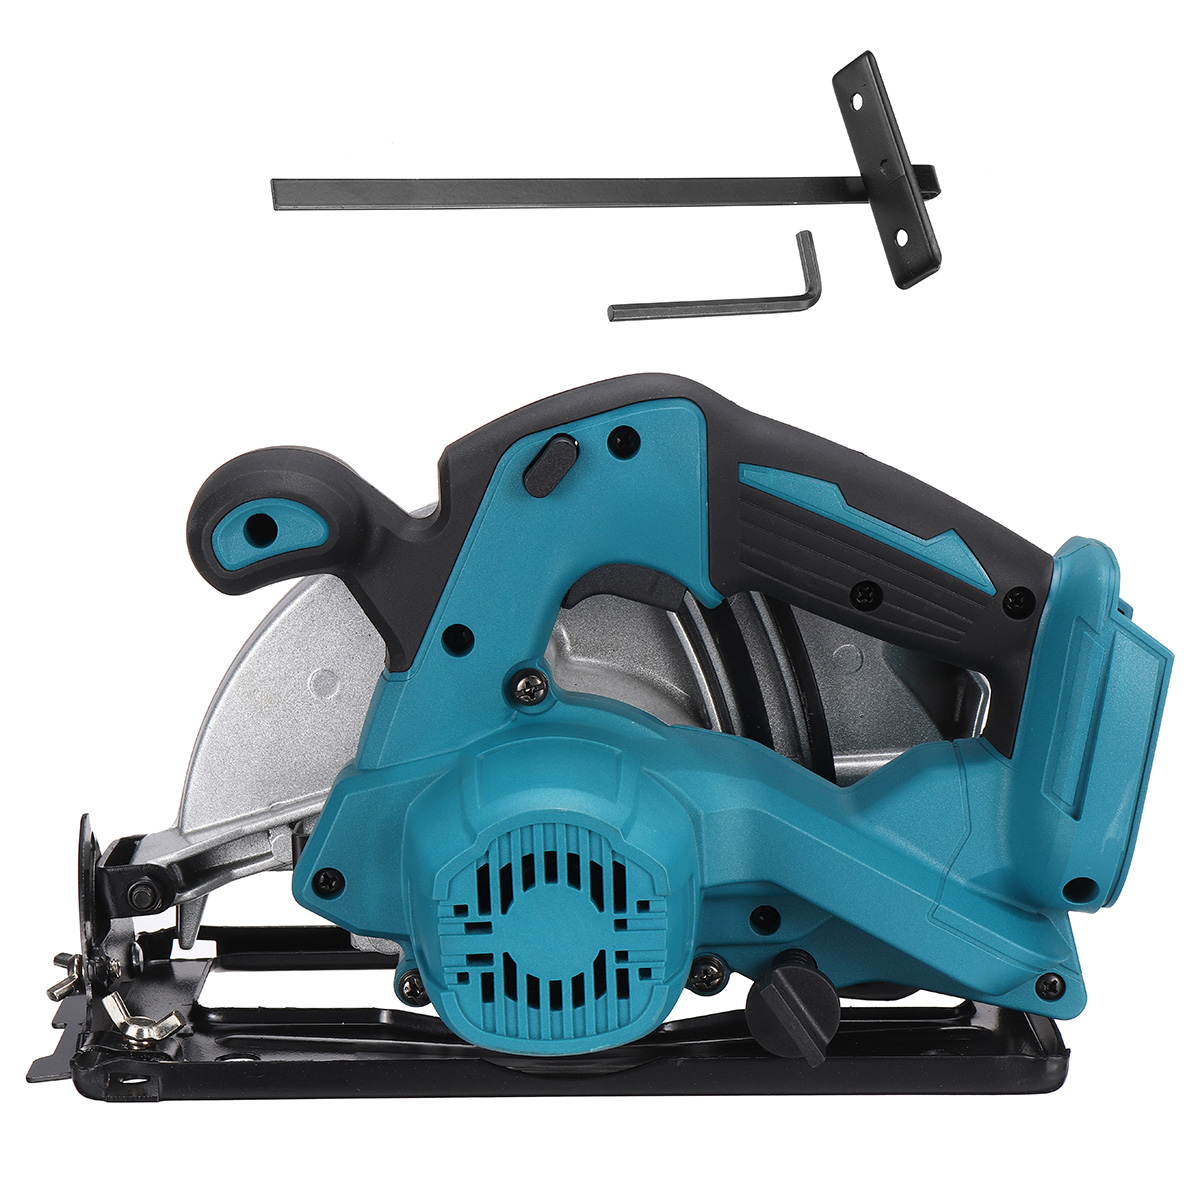 Find 190mm Cordless Electric Circular Saw Fit Makita 3800r/min Cordless Circular Saw Tool for Sale on Gipsybee.com with cryptocurrencies